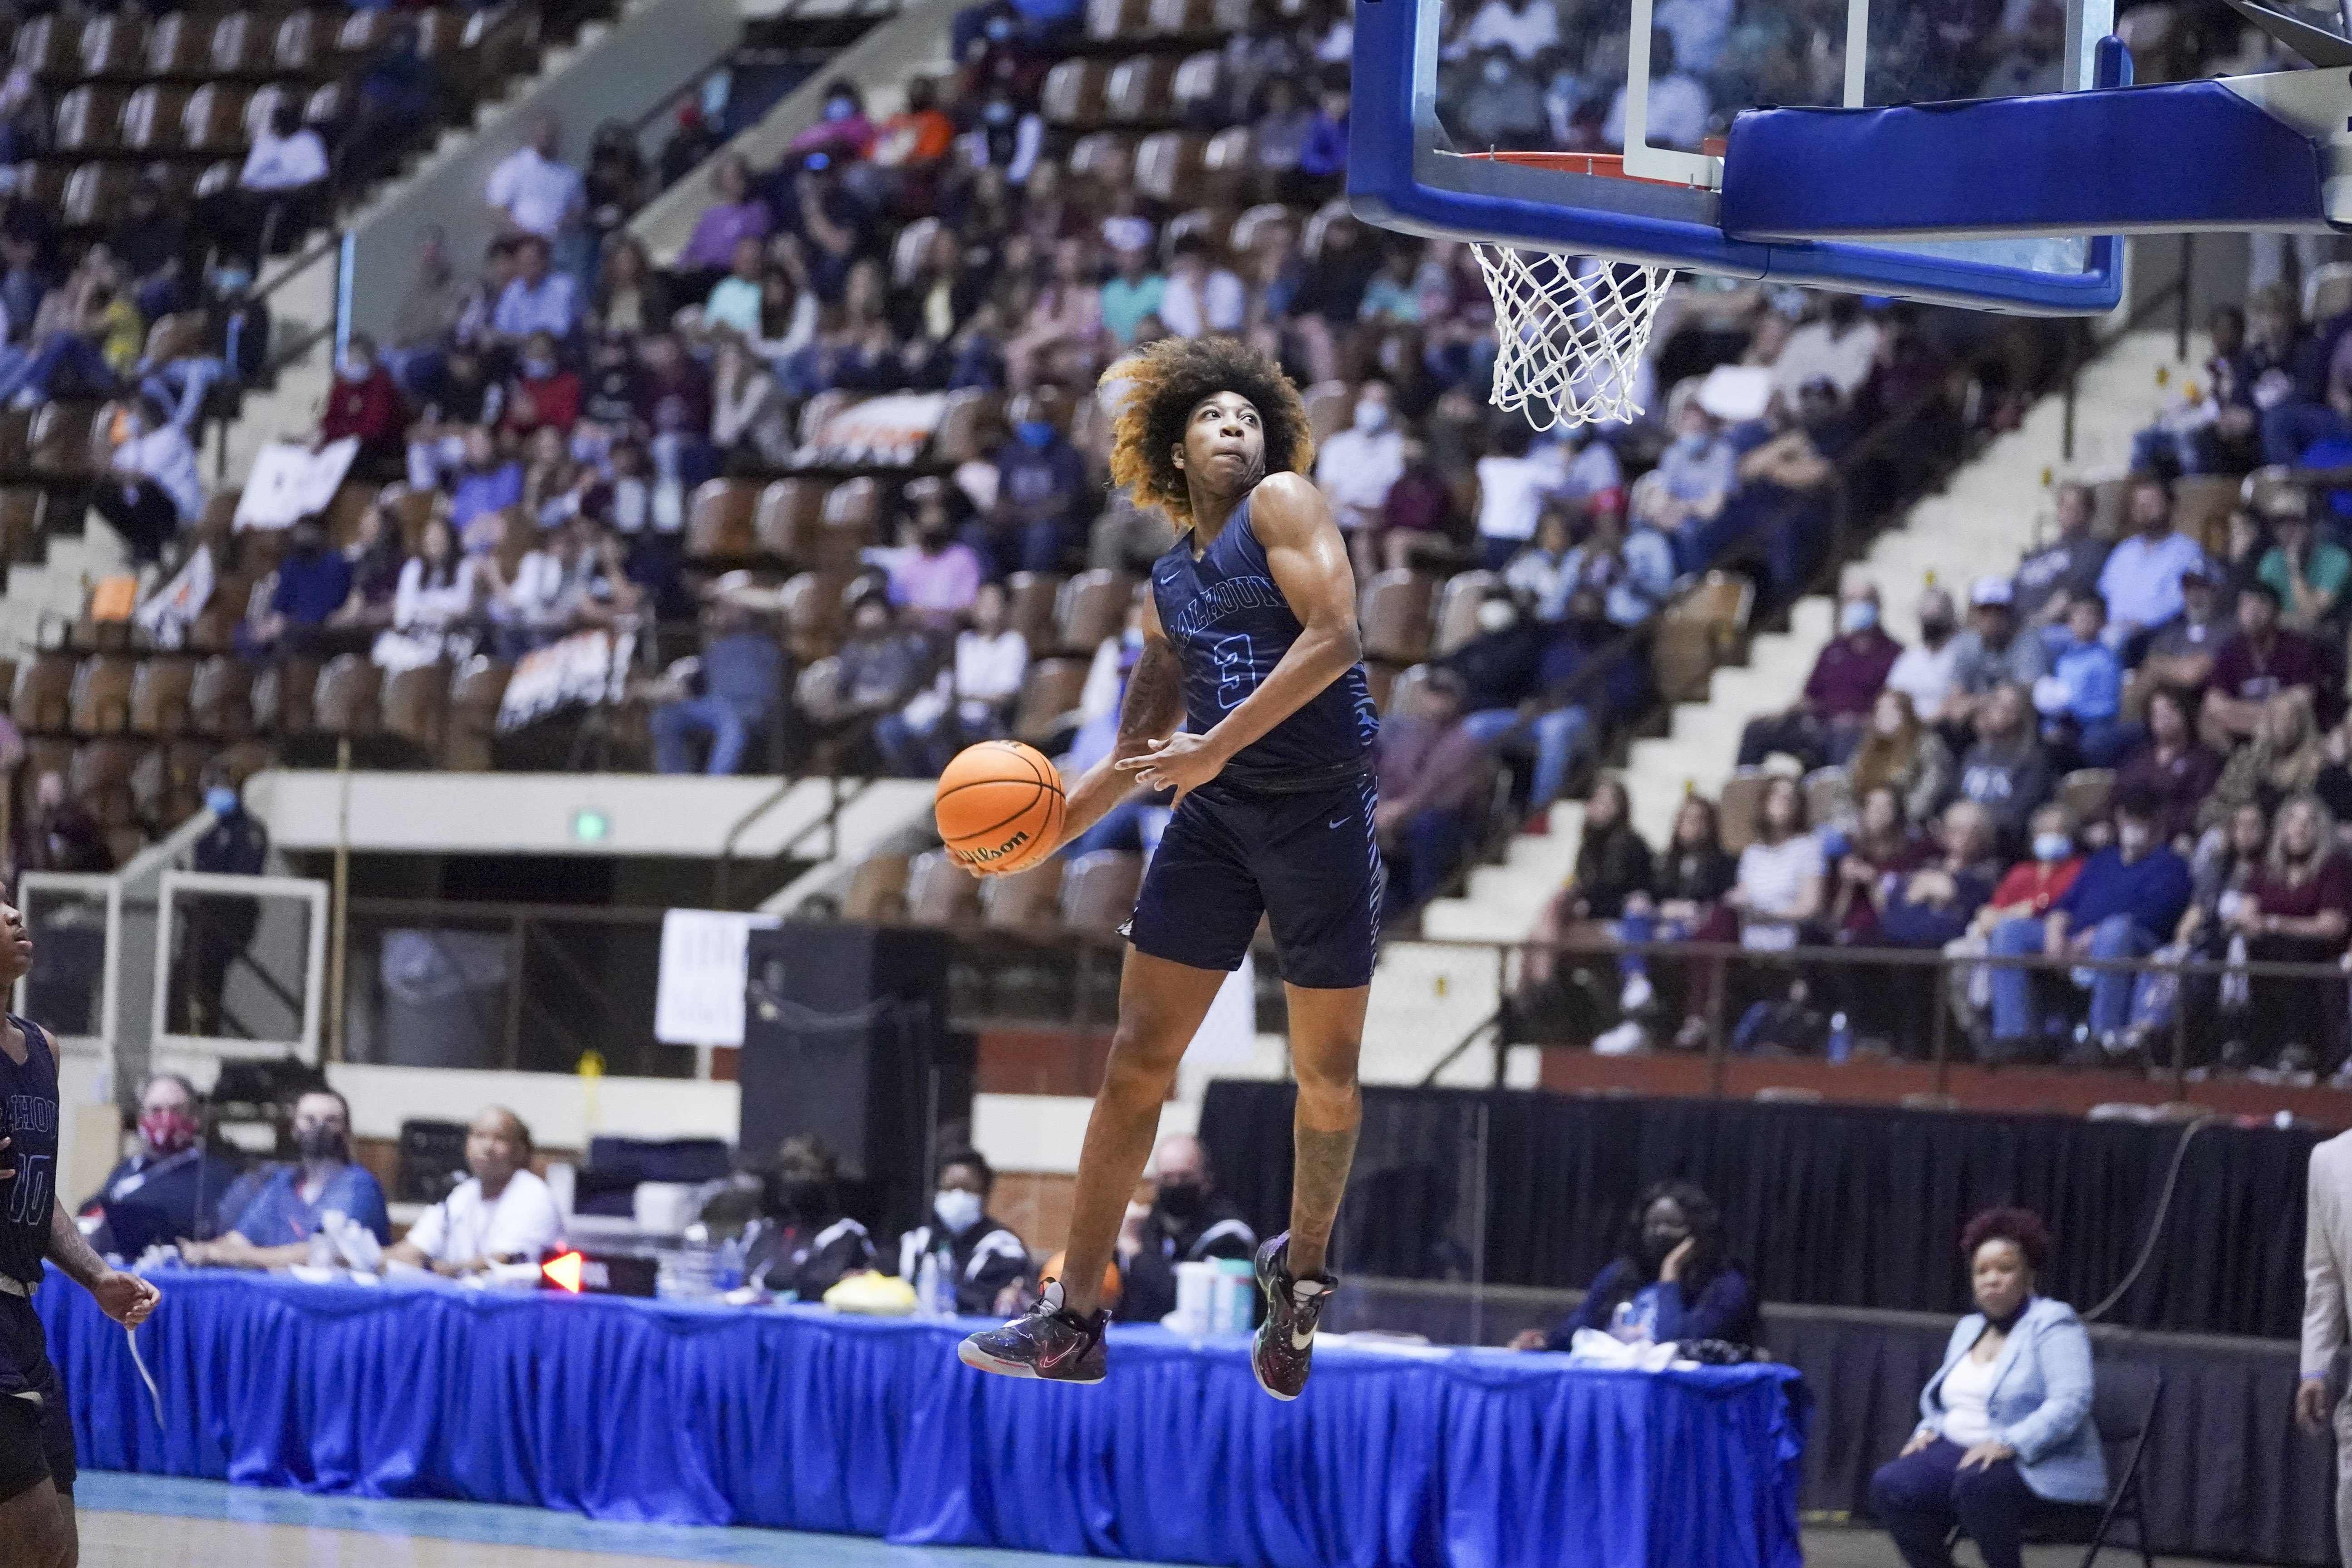 It's LSU! Five-star forward Trendon Watford signs as first member of  Tigers' spring recruit class, LSU